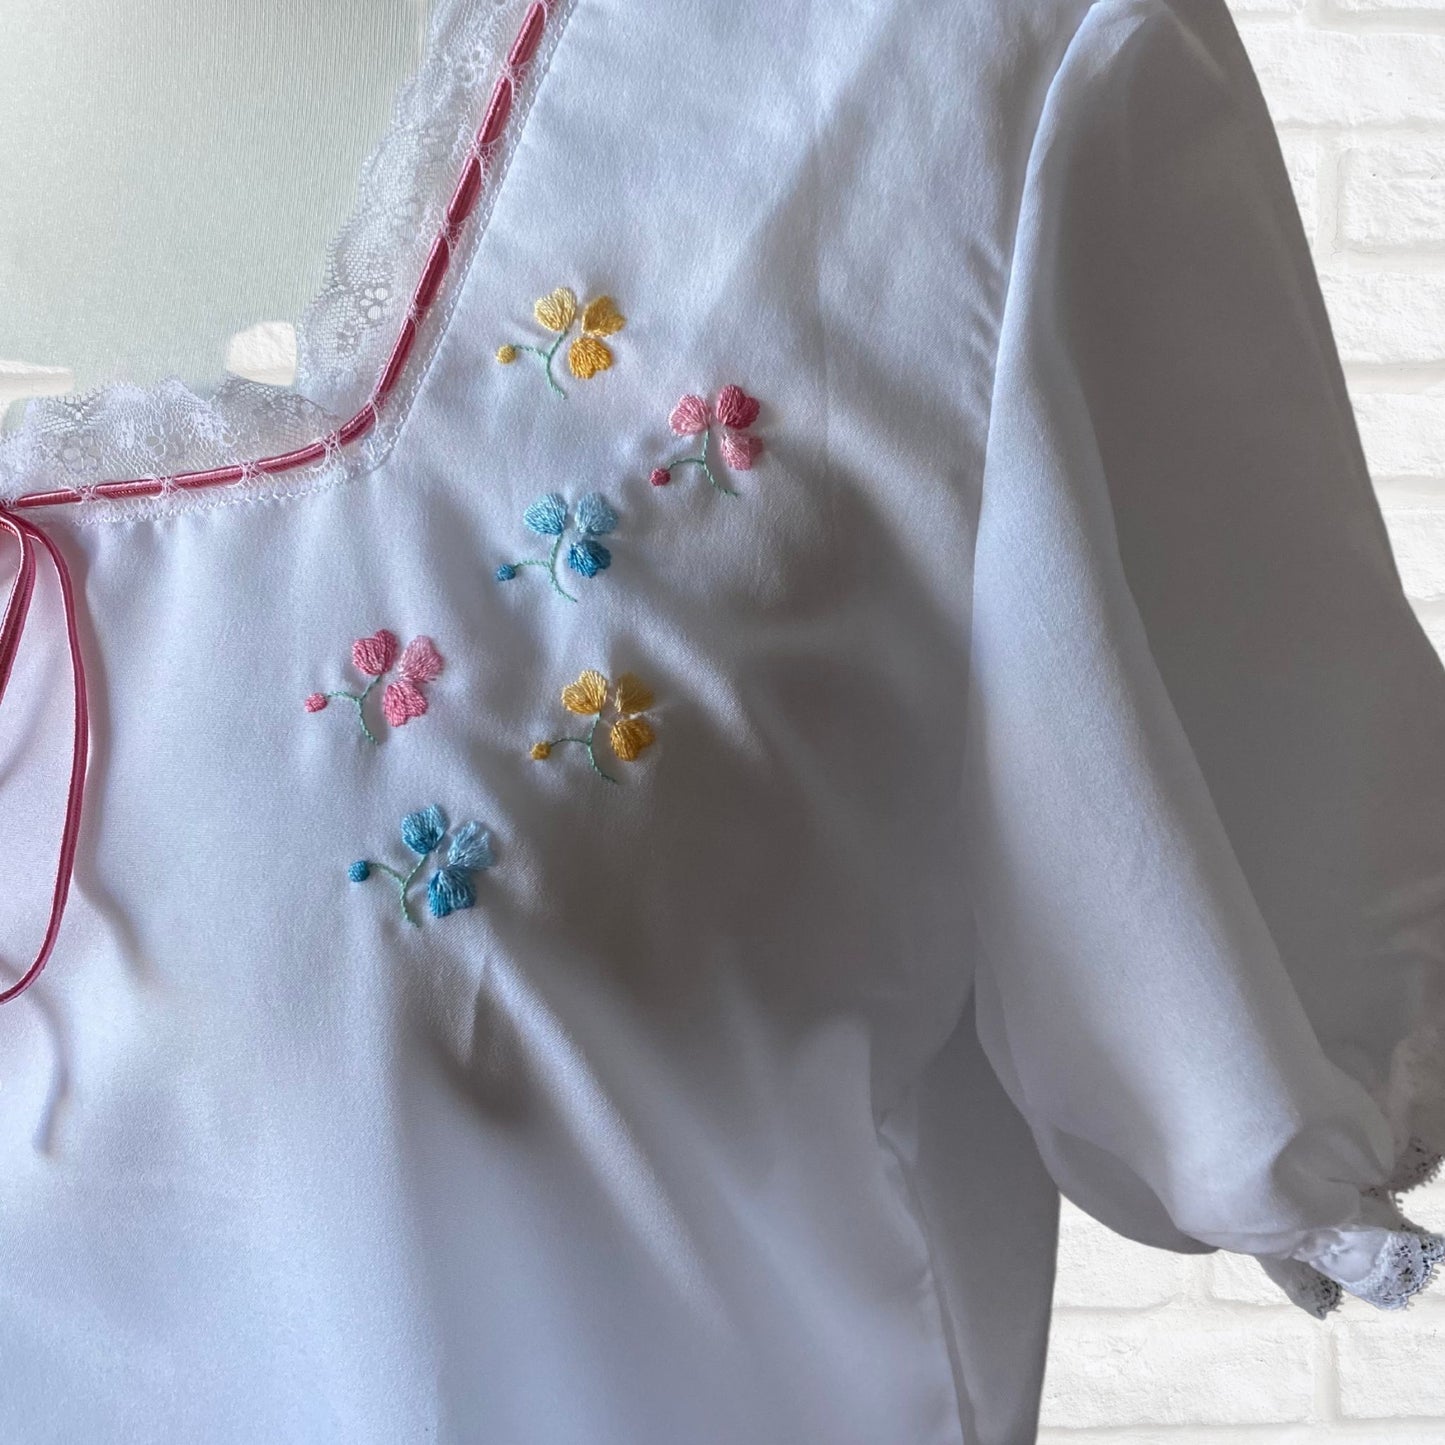 Vintage white puff sleeved nightgown with pink embroidered flower detail. Approx UK size 14-20